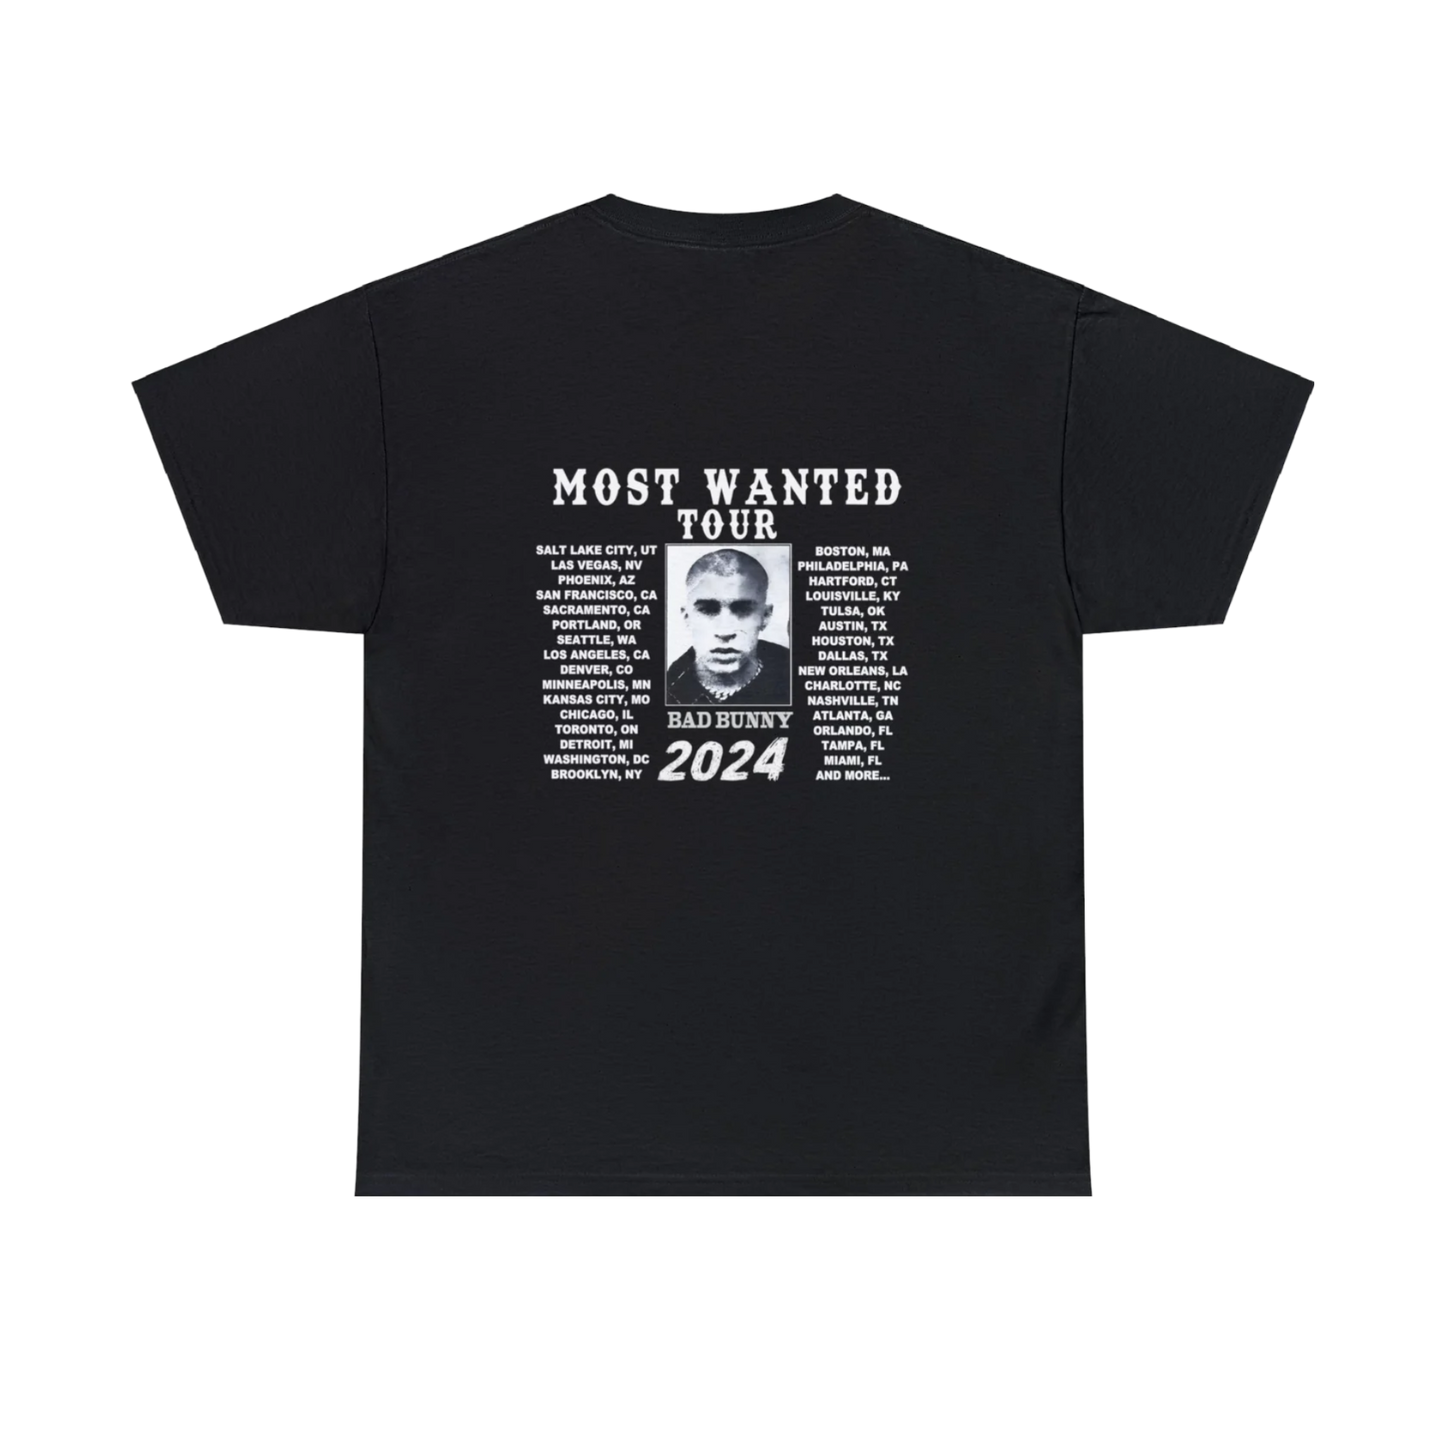 MOST WANTED TOUR - BURNING TELEPHONE BLACK COTTON TEE